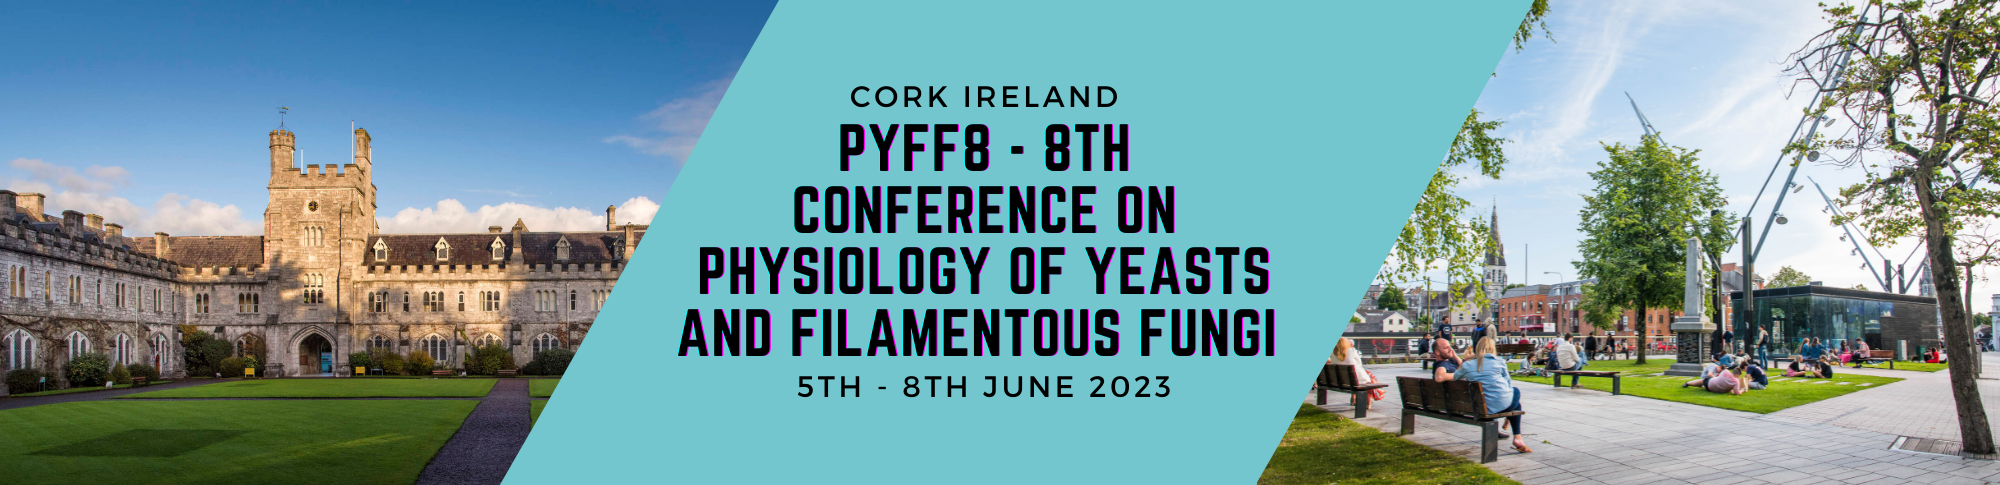 Physiology of Yeast and Filamentous Fungi Event Banner - 5 - 8 June 2023. Cork, Ireland